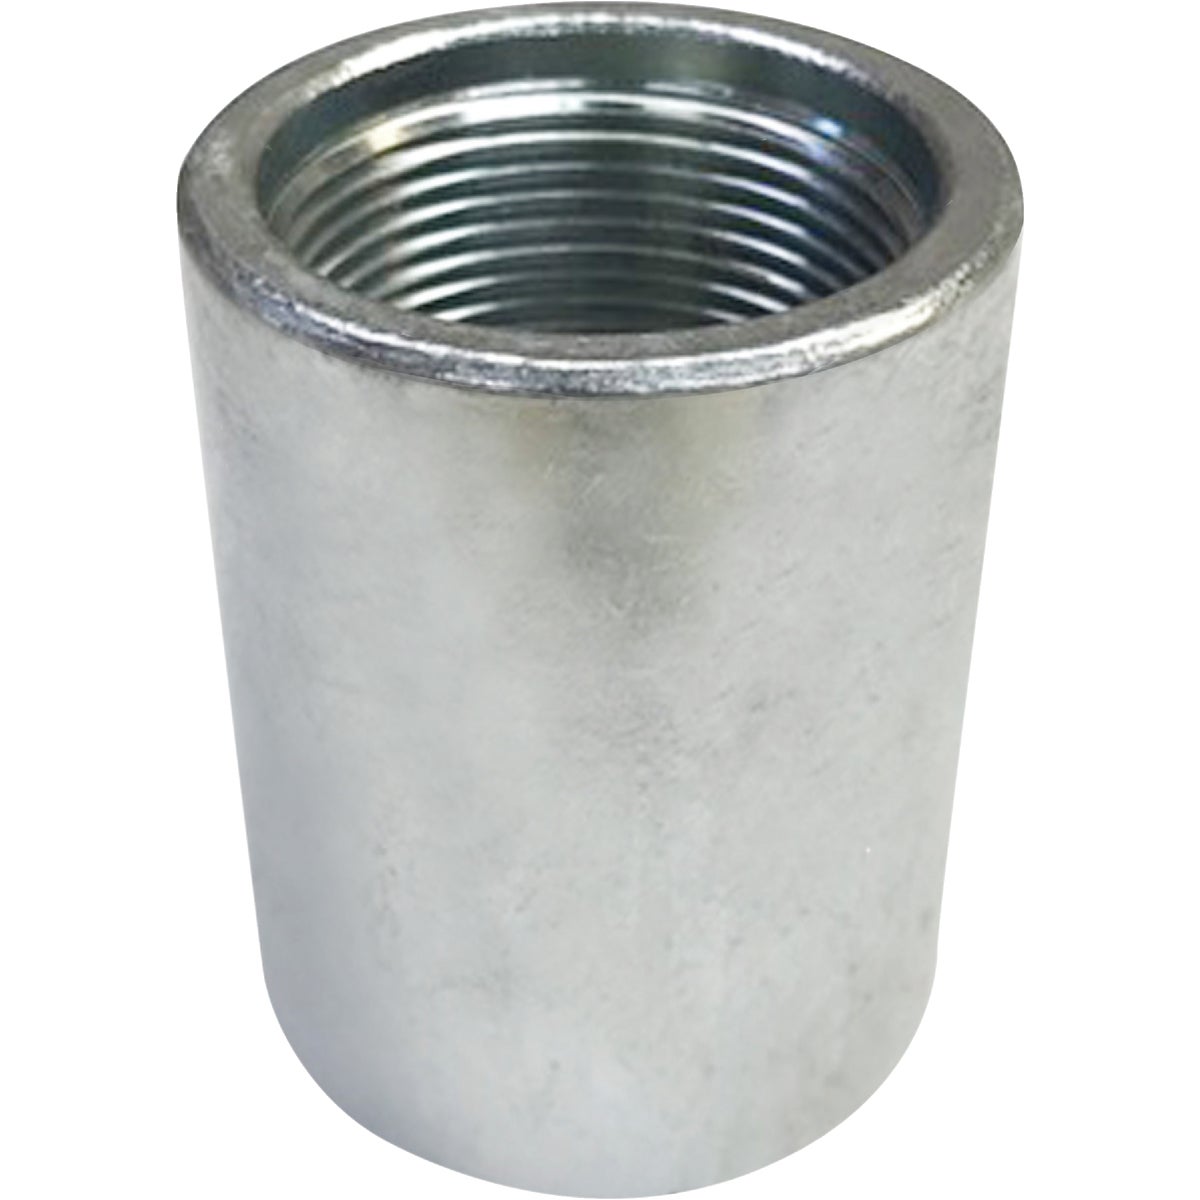 Item 426505, Extra heavy, recessed and straight tapped. All forged steel.<br>
<br><b>No. 946:</b> Size: 1-1/4 In., Material: Forged Steel